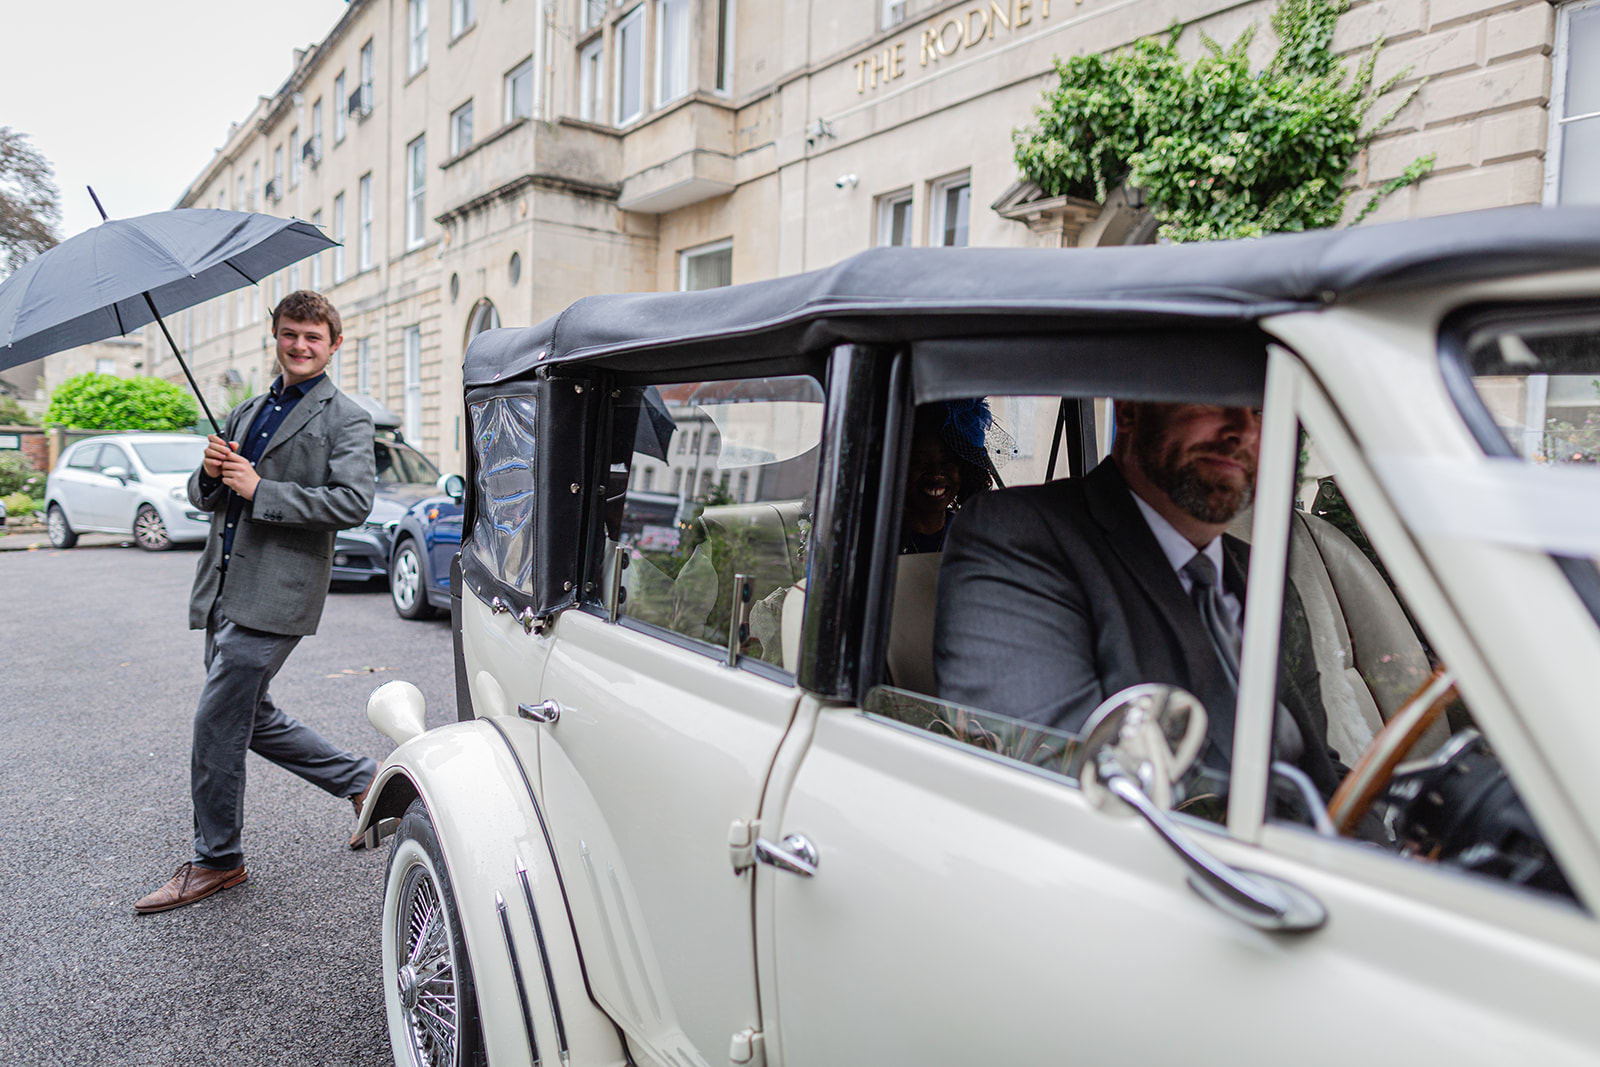 Bride arrives in old classic wedding car.